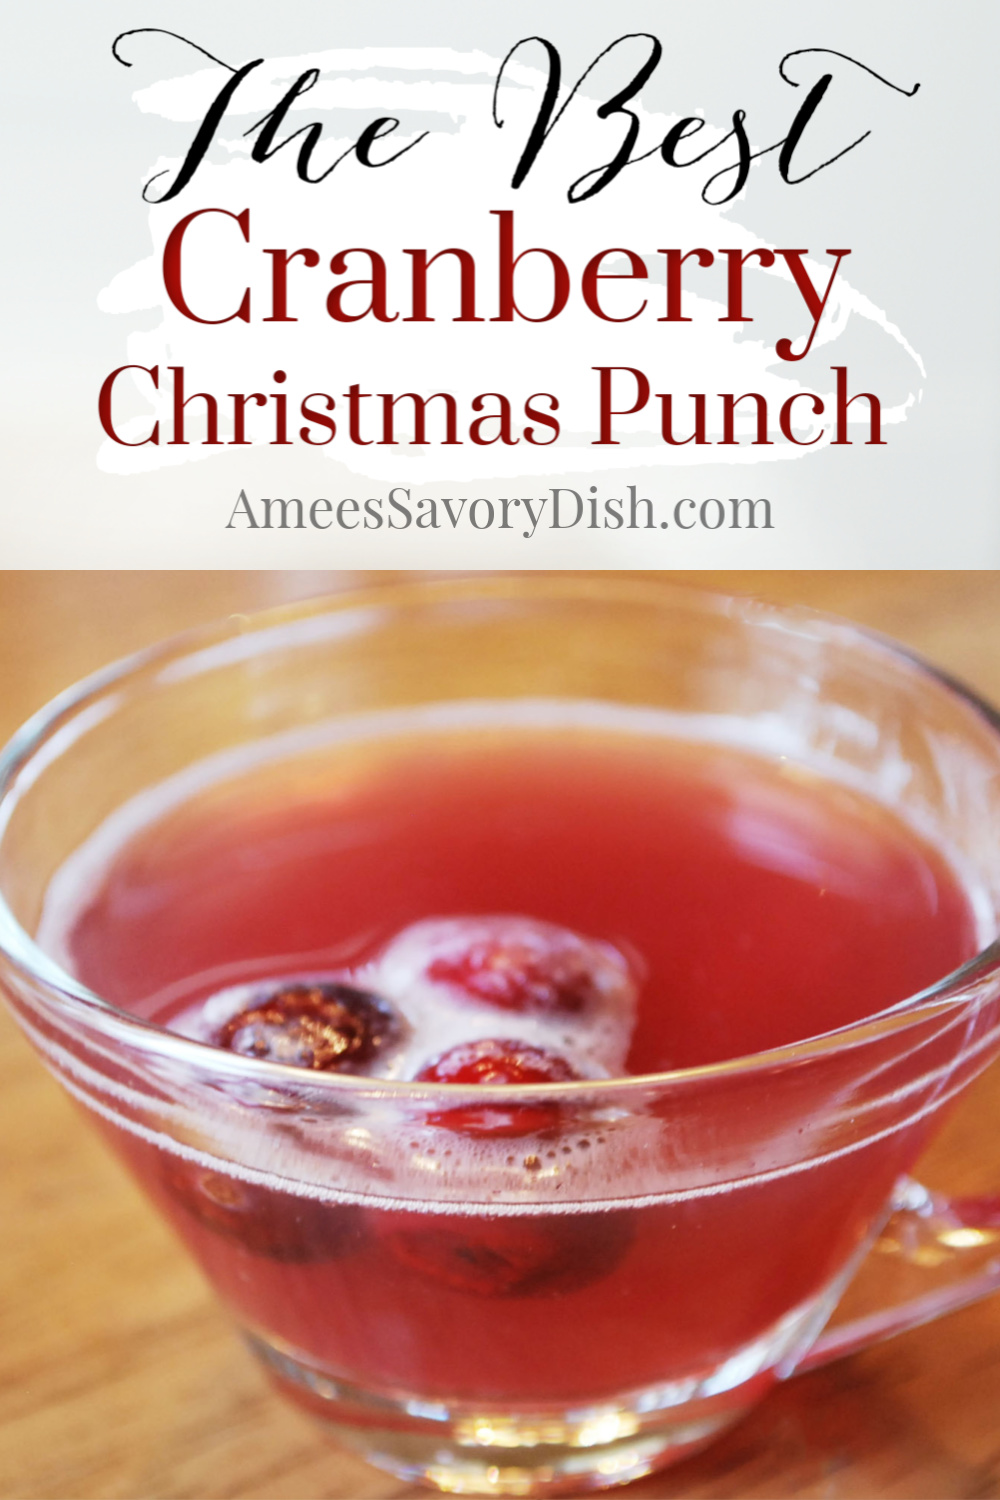 The Best Cranberry Christmas Punch recipe- Amee's Savory Dish